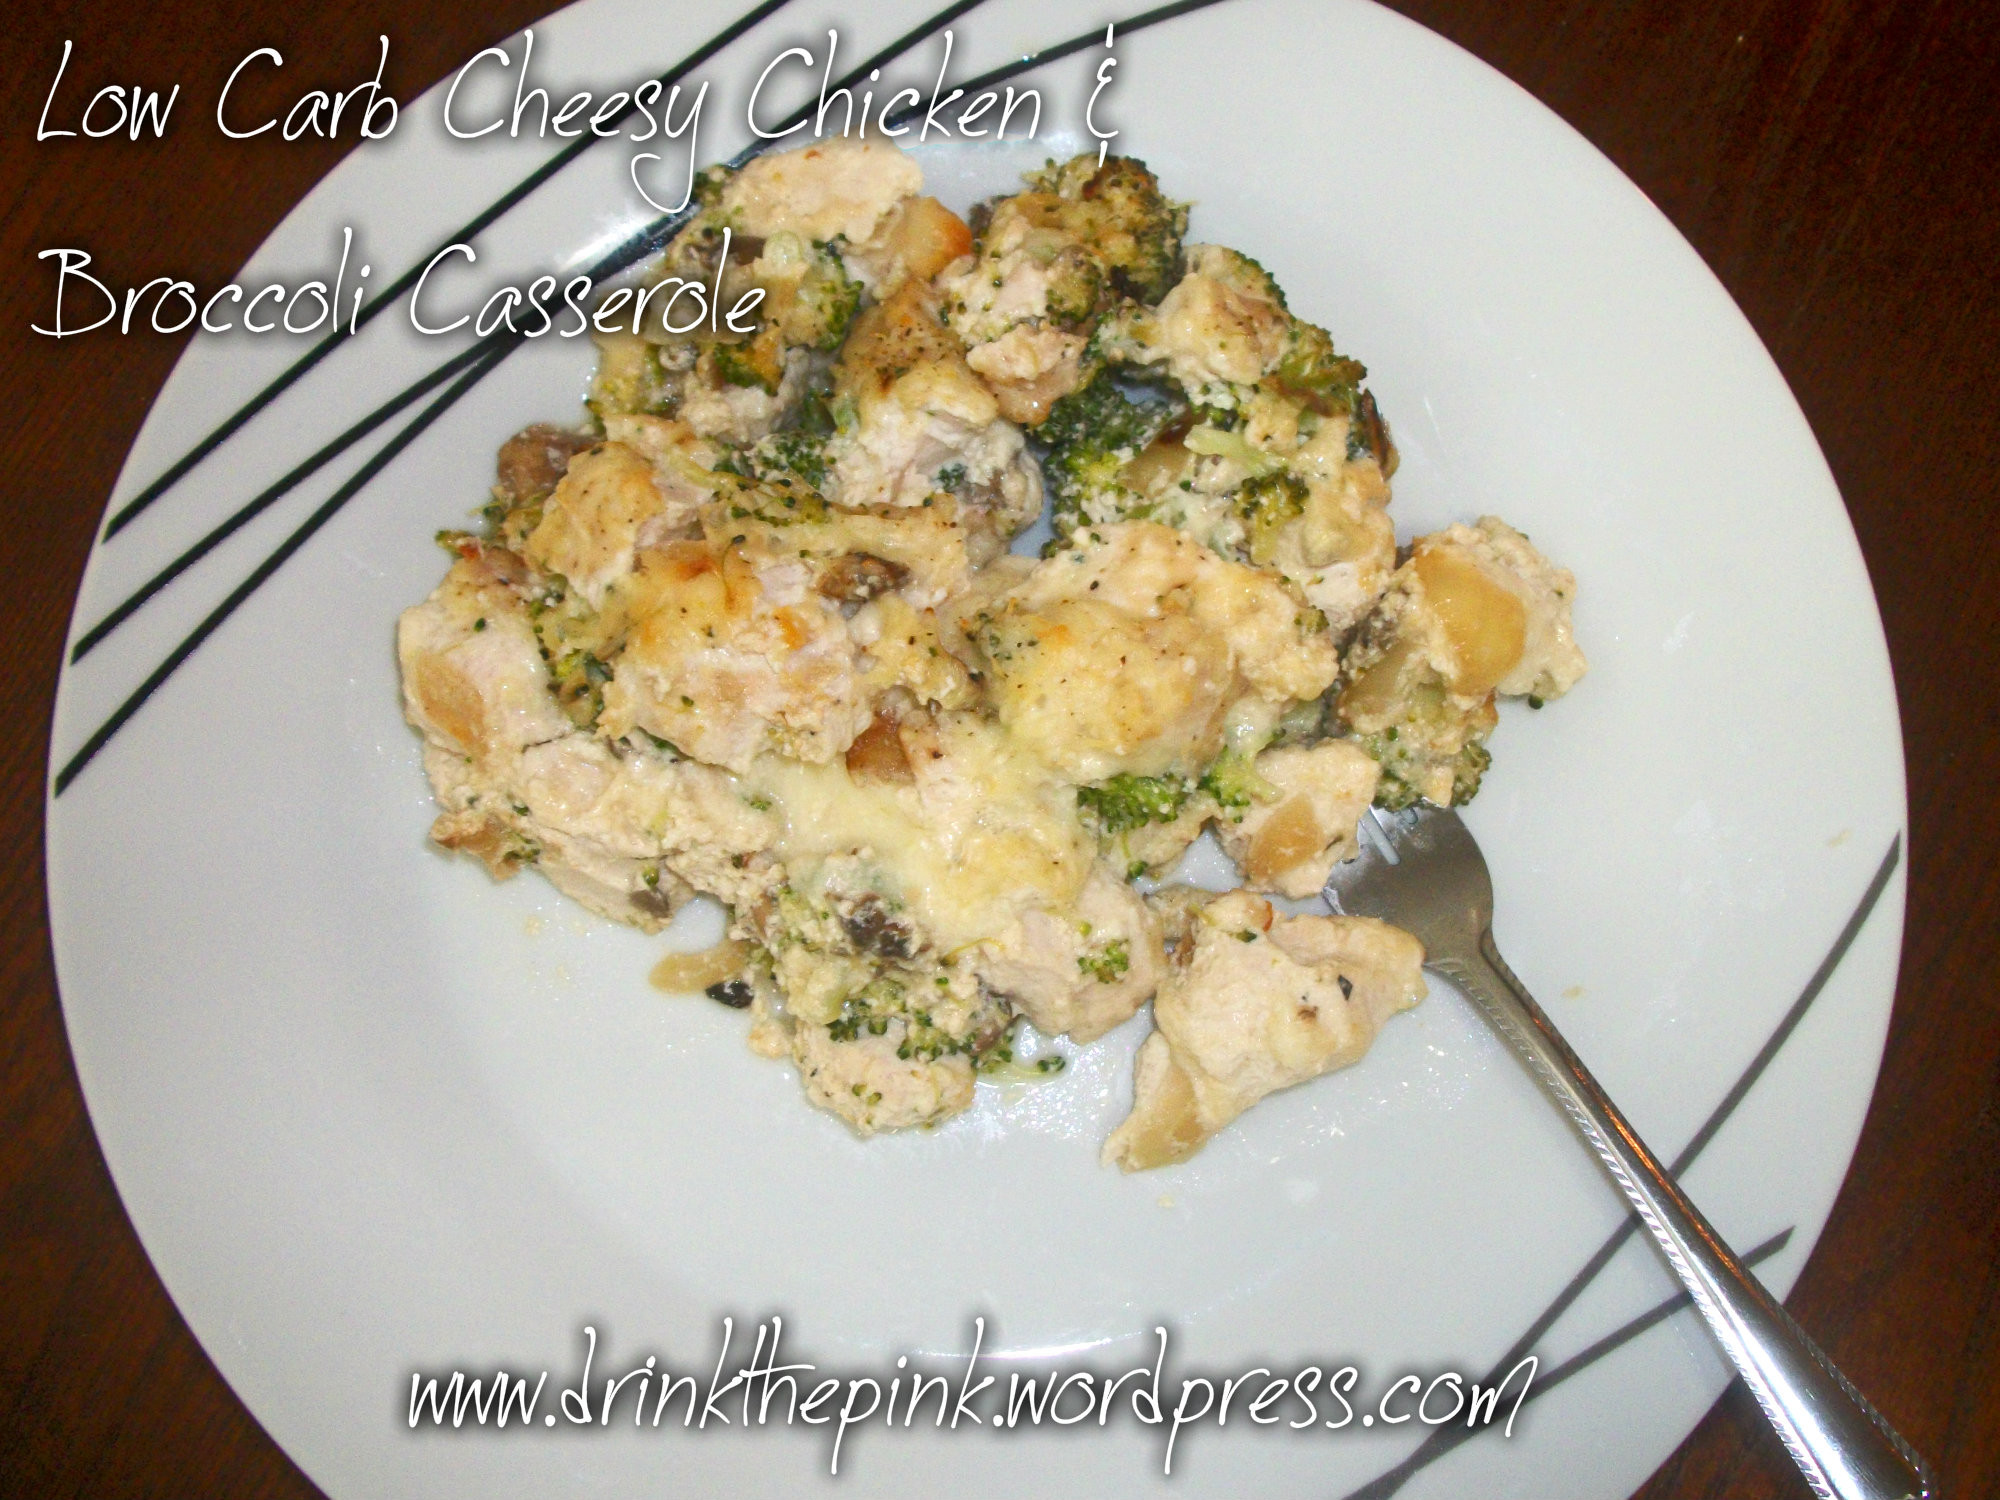 Low Carb Chicken And Broccoli Casserole
 Low Carb Cheesy Chicken & Broccoli Casserole Recipe